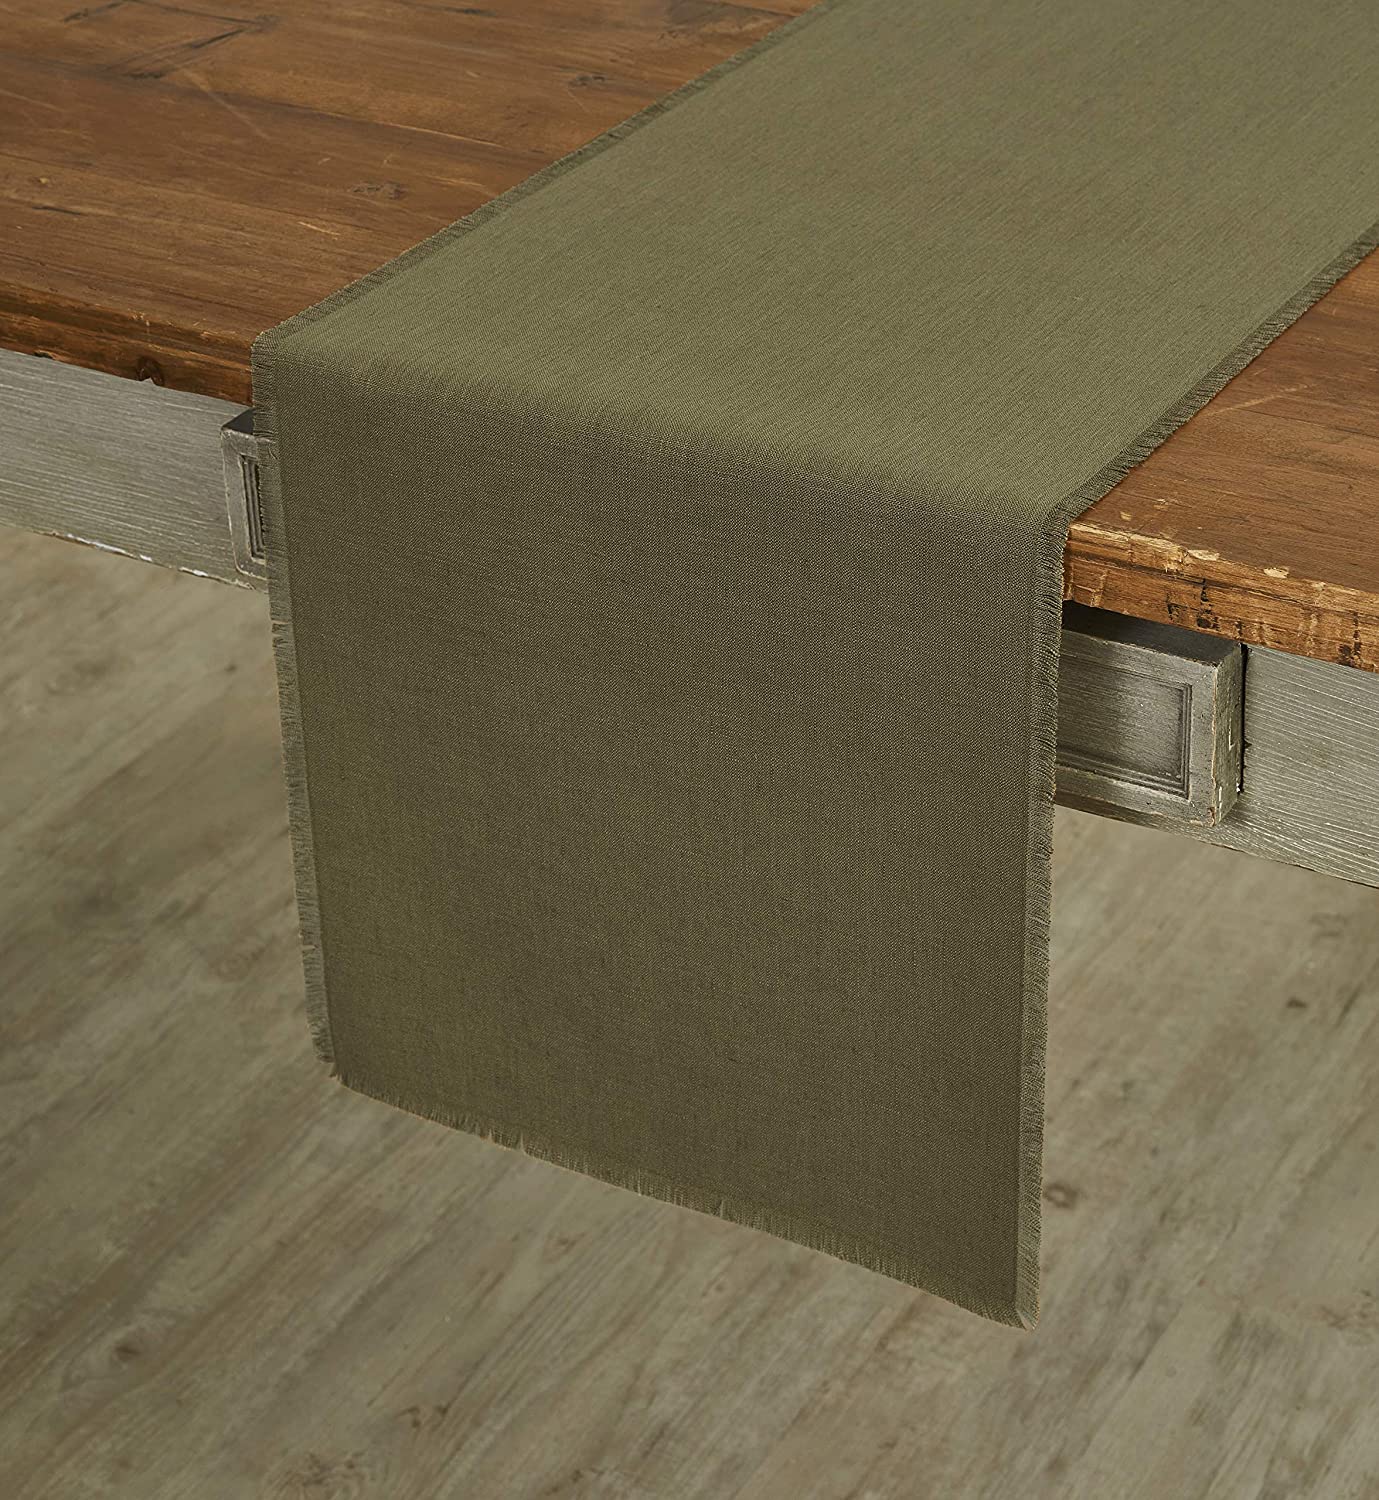 14 x 72 Inch European Flax Table Runner Olive Solino Home Medium Weight Linen Table Runner 100% Pure Linen Natural Fabric